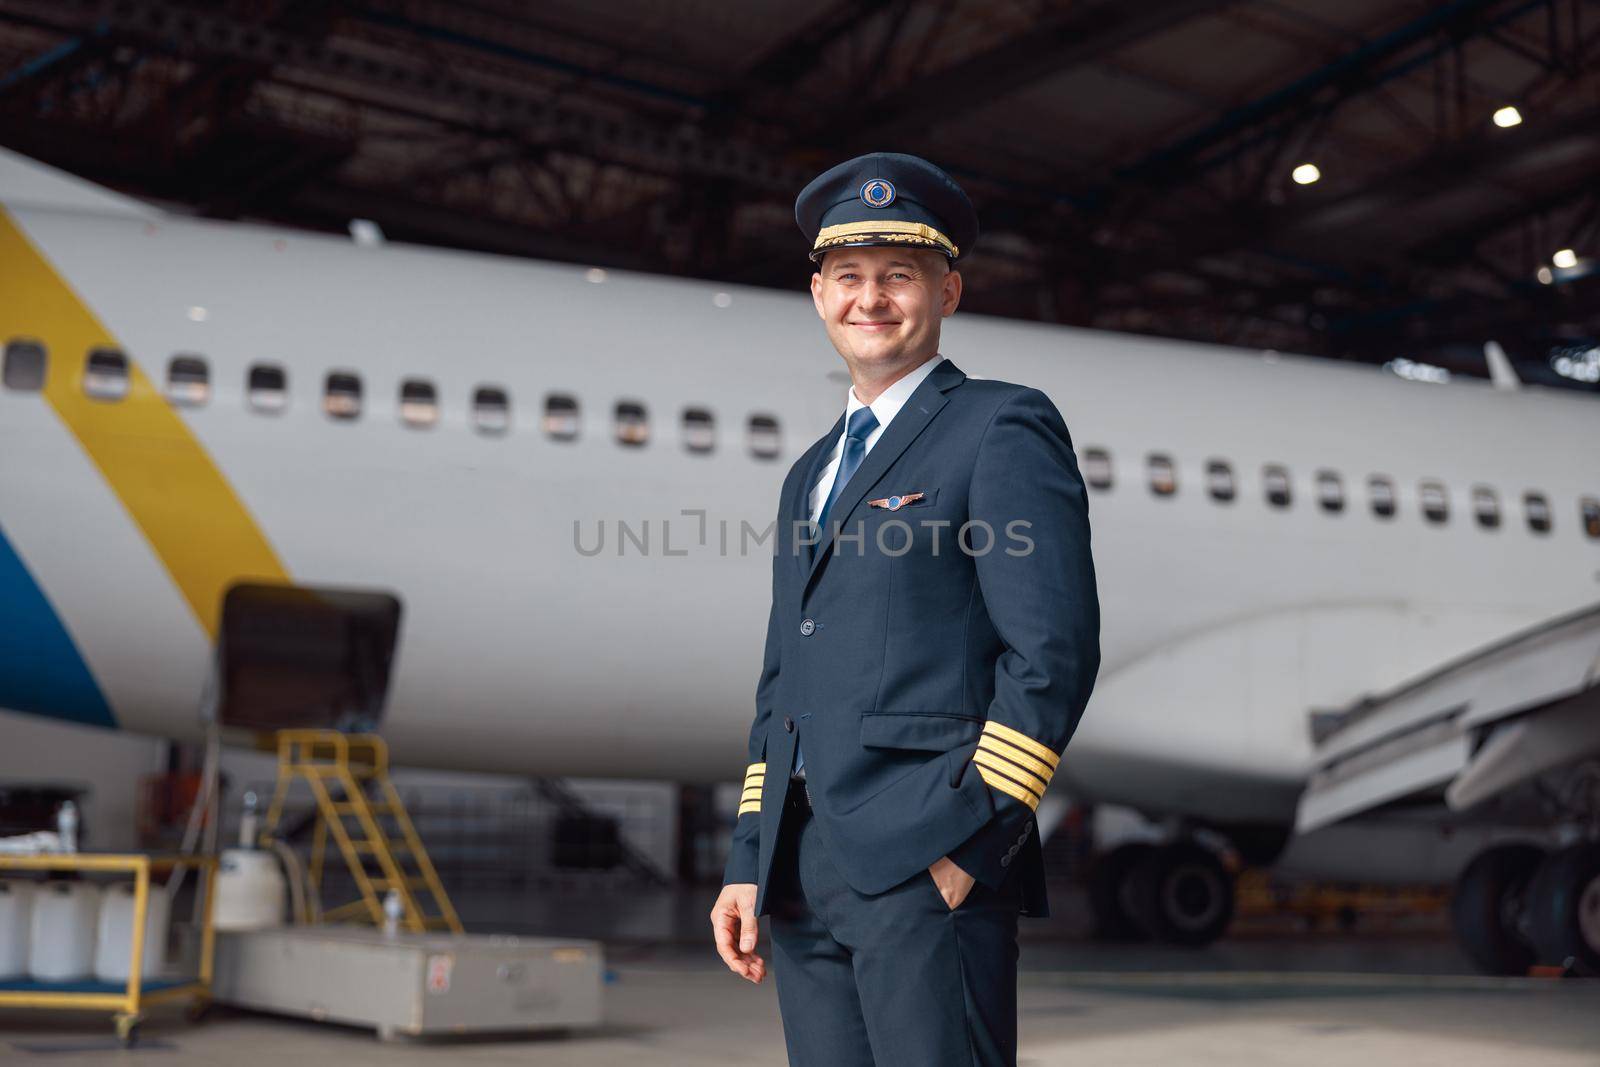 Portrait of smiling pilot in uniform looking at camera, standing in front of big passenger airplane in airport hangar by Yaroslav_astakhov